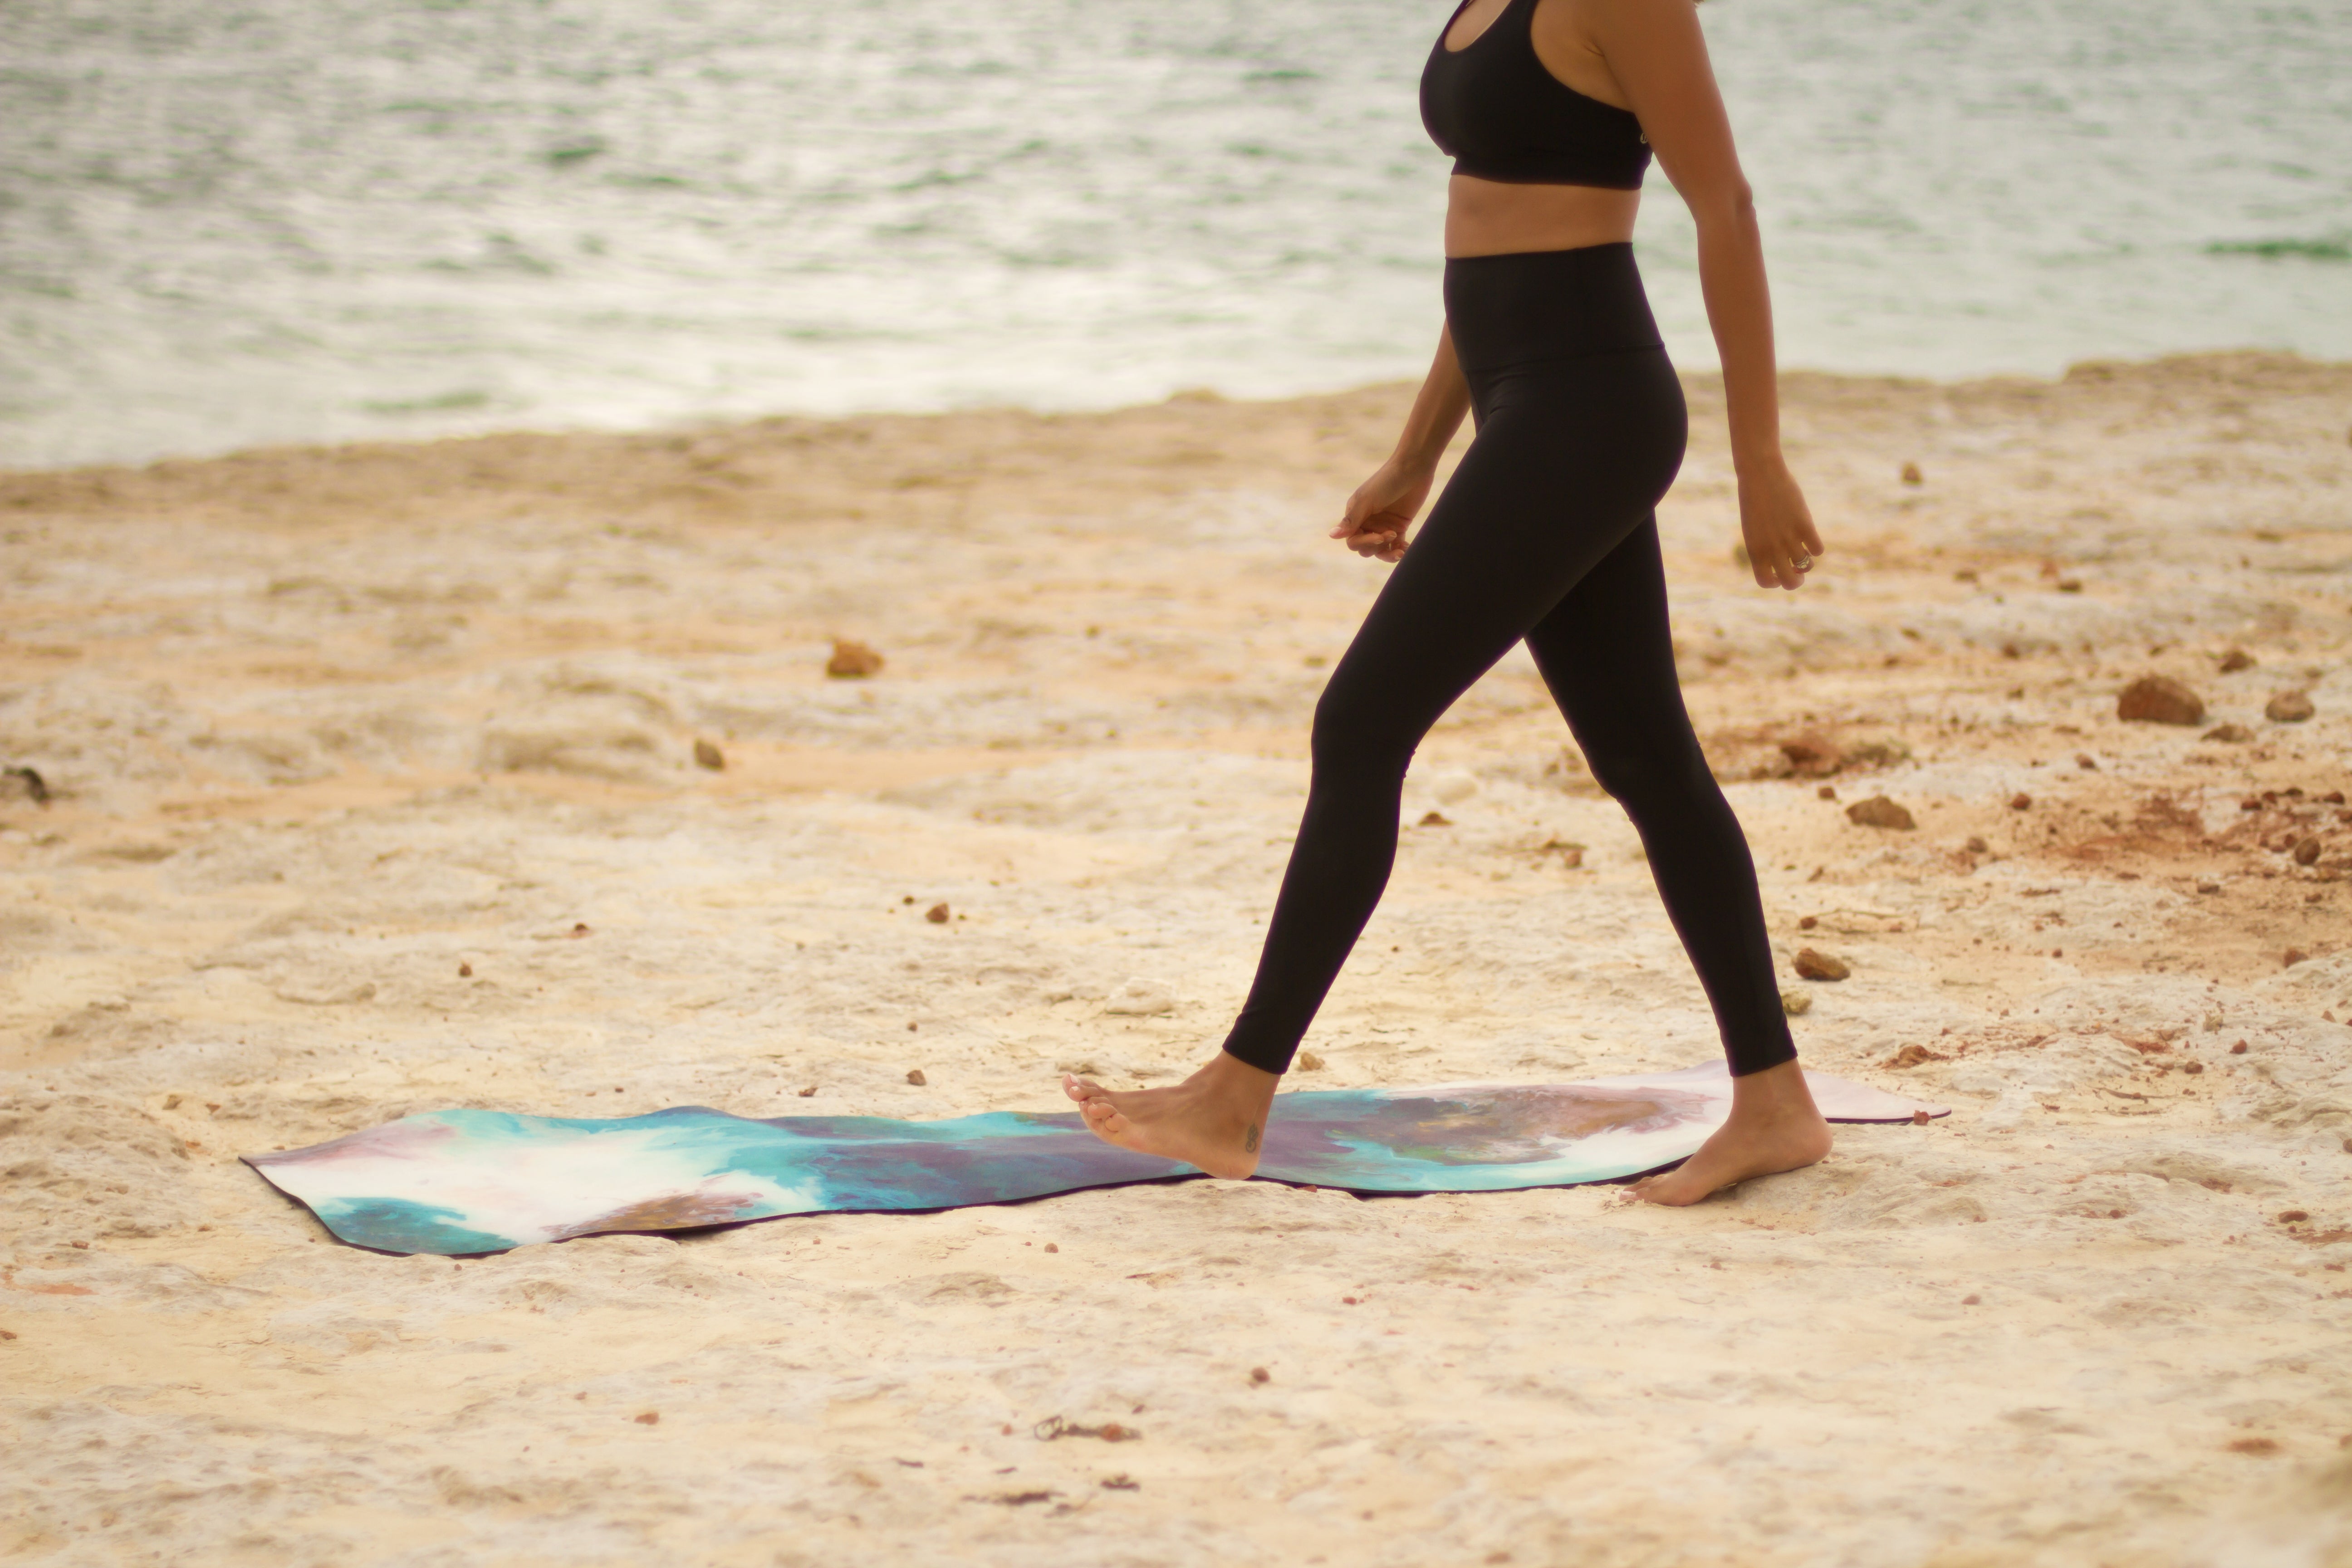 Eco Yoga Mat "Into the Woods"